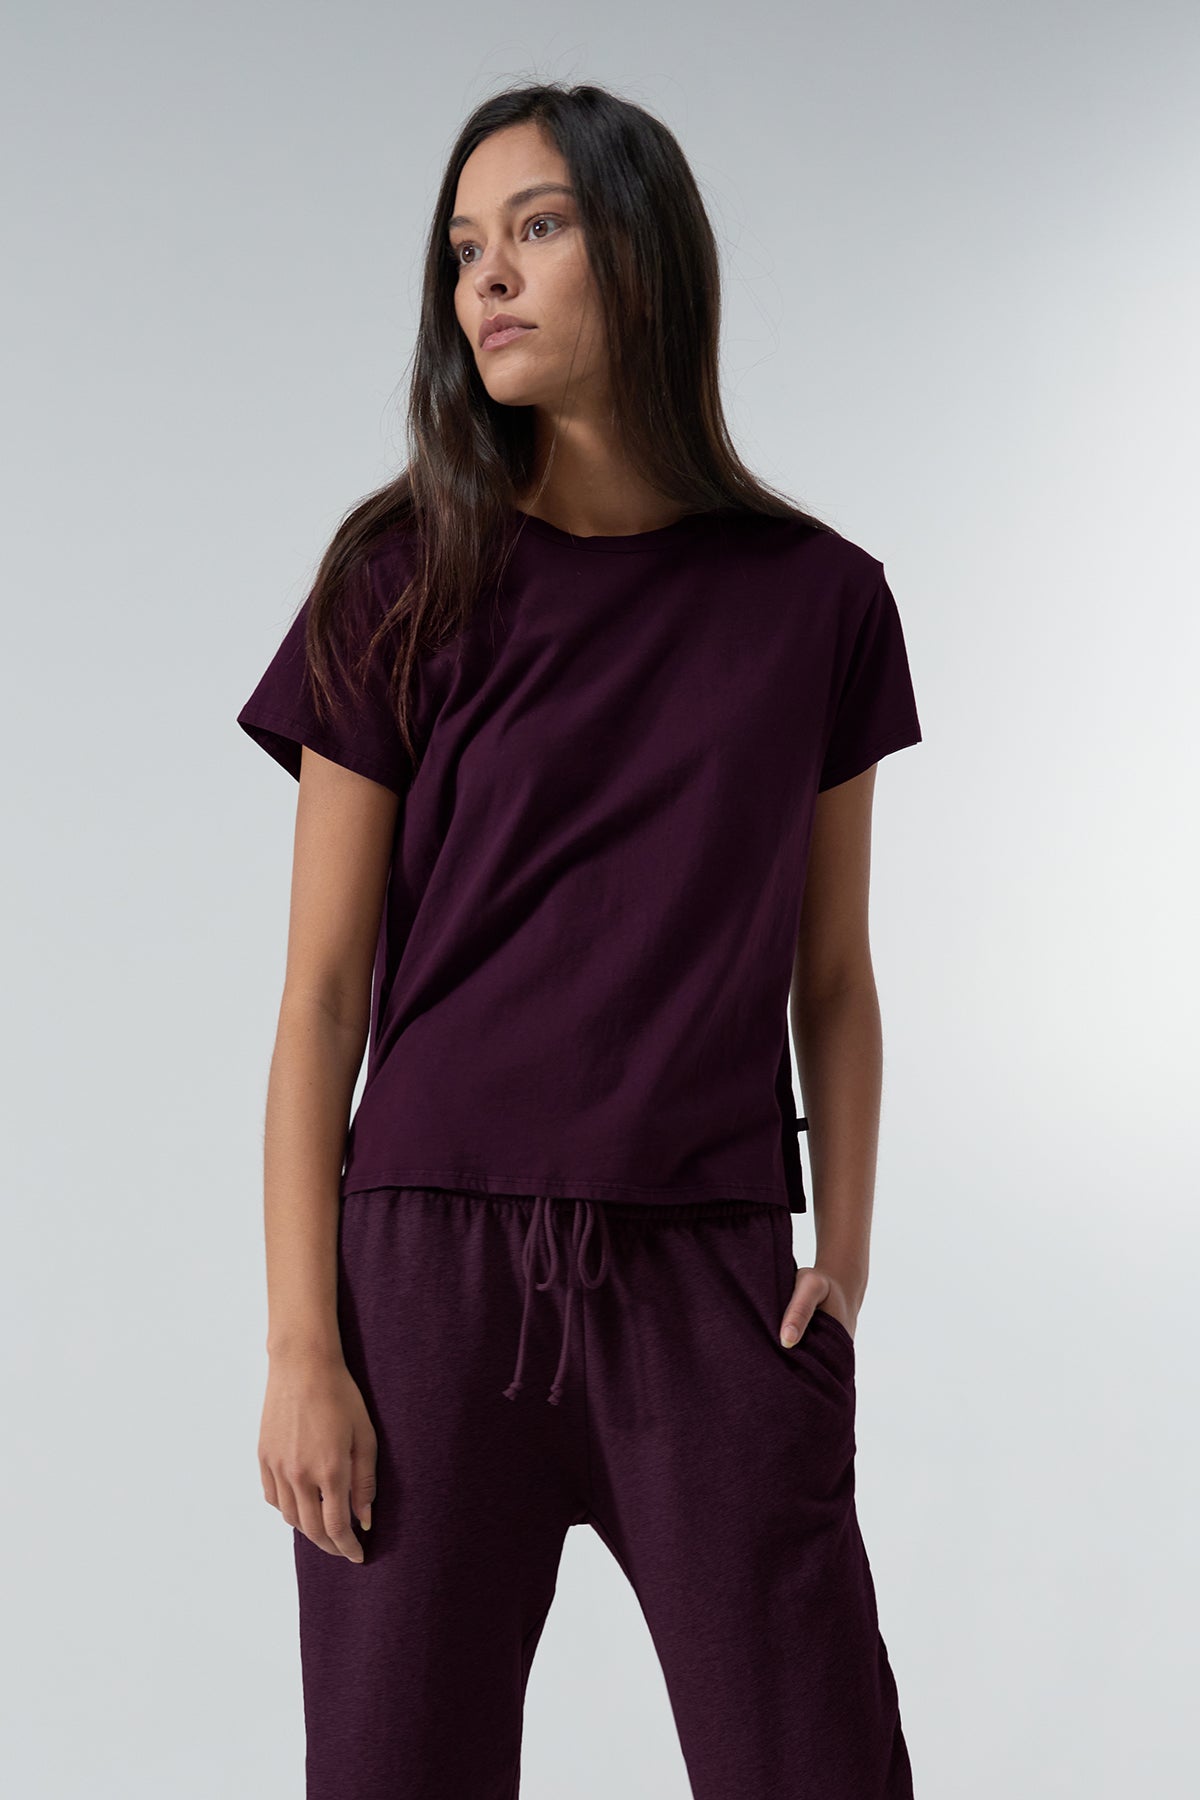   Topanga Tee Mulberry with Montecito Sweatpant Mulberry Front 